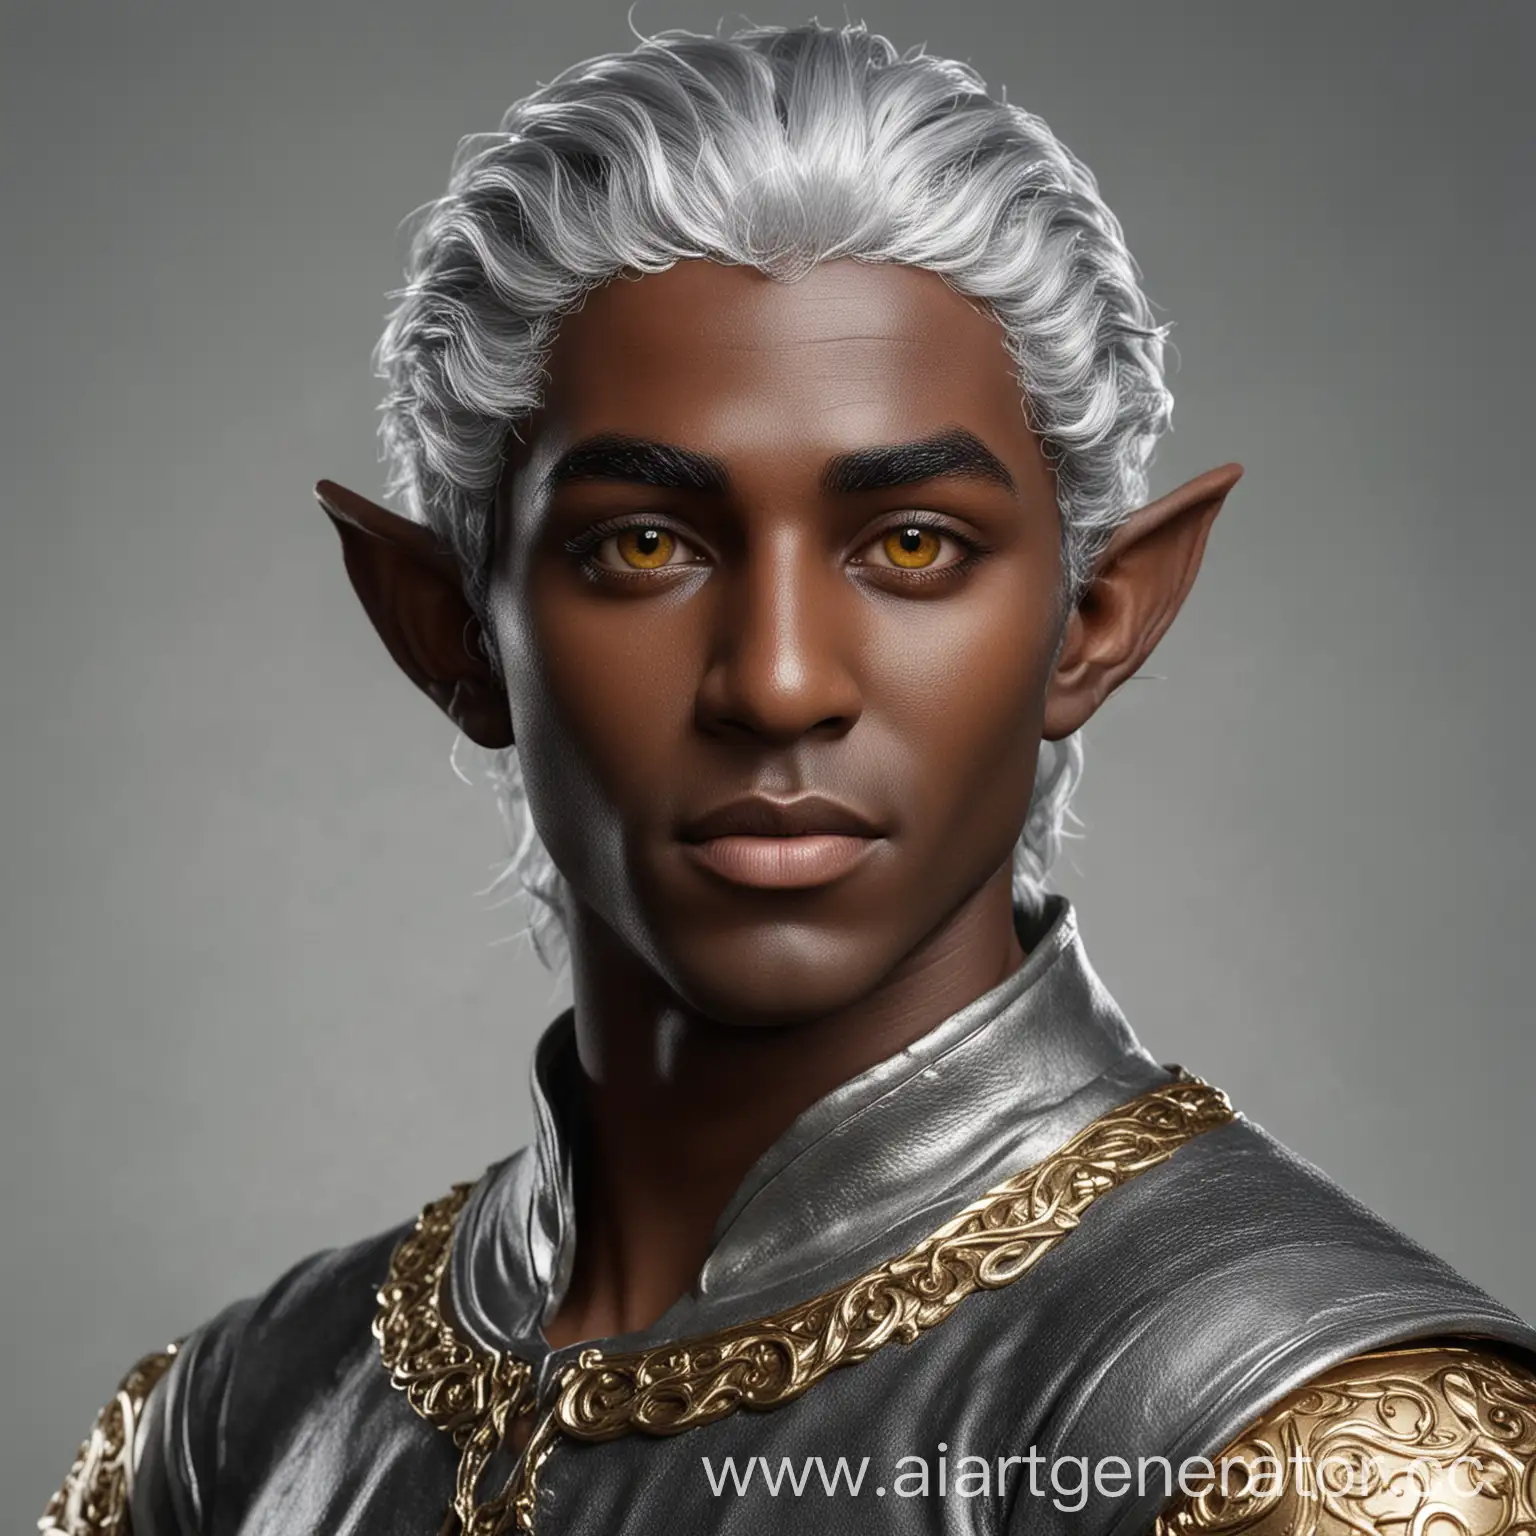 Mystical-Elf-with-Black-Skin-SilverGray-Hair-and-Golden-Eyes